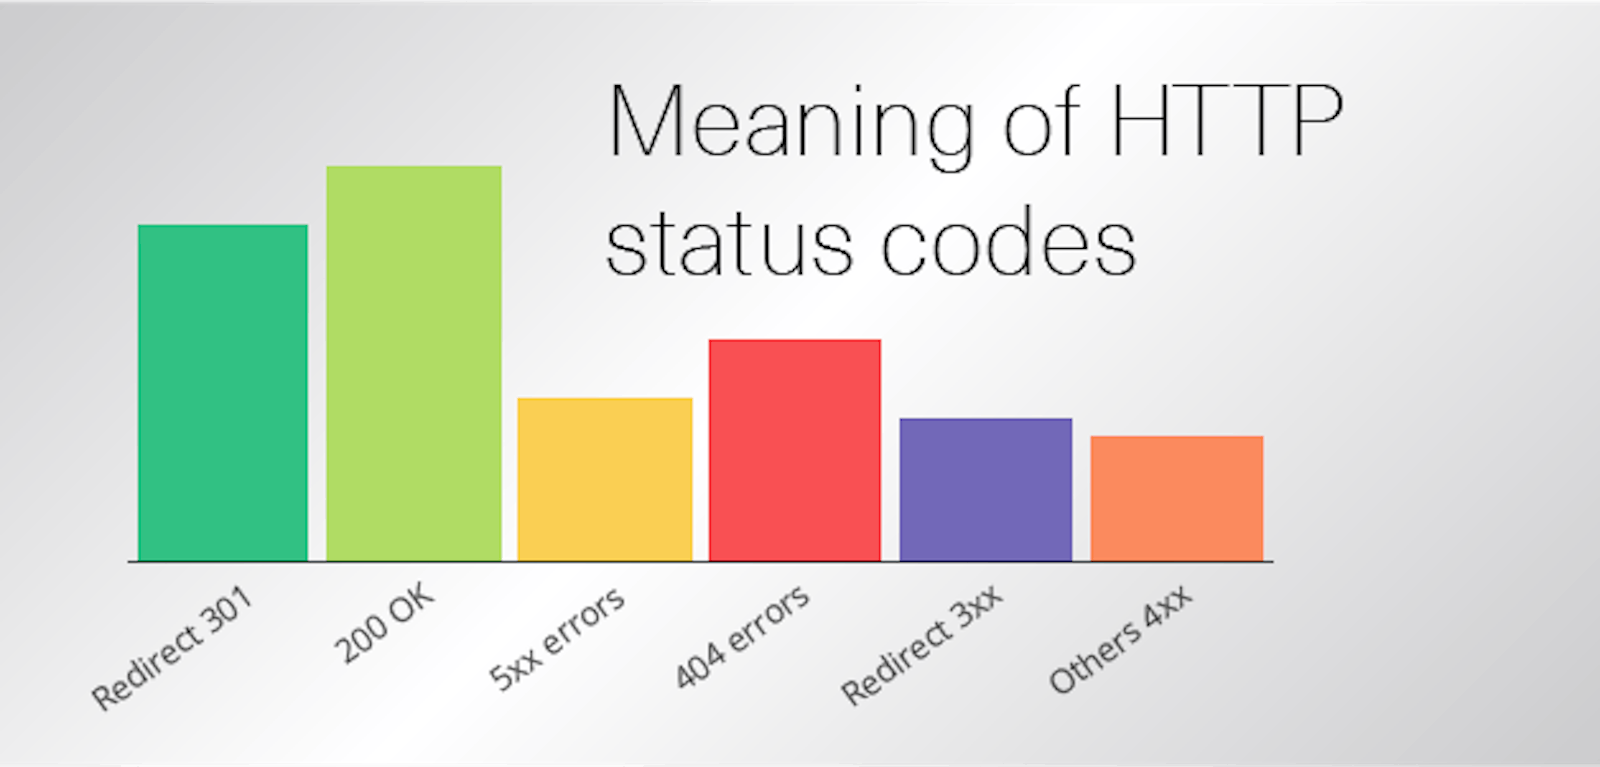 HTTP Status Codes: What Each Code Means